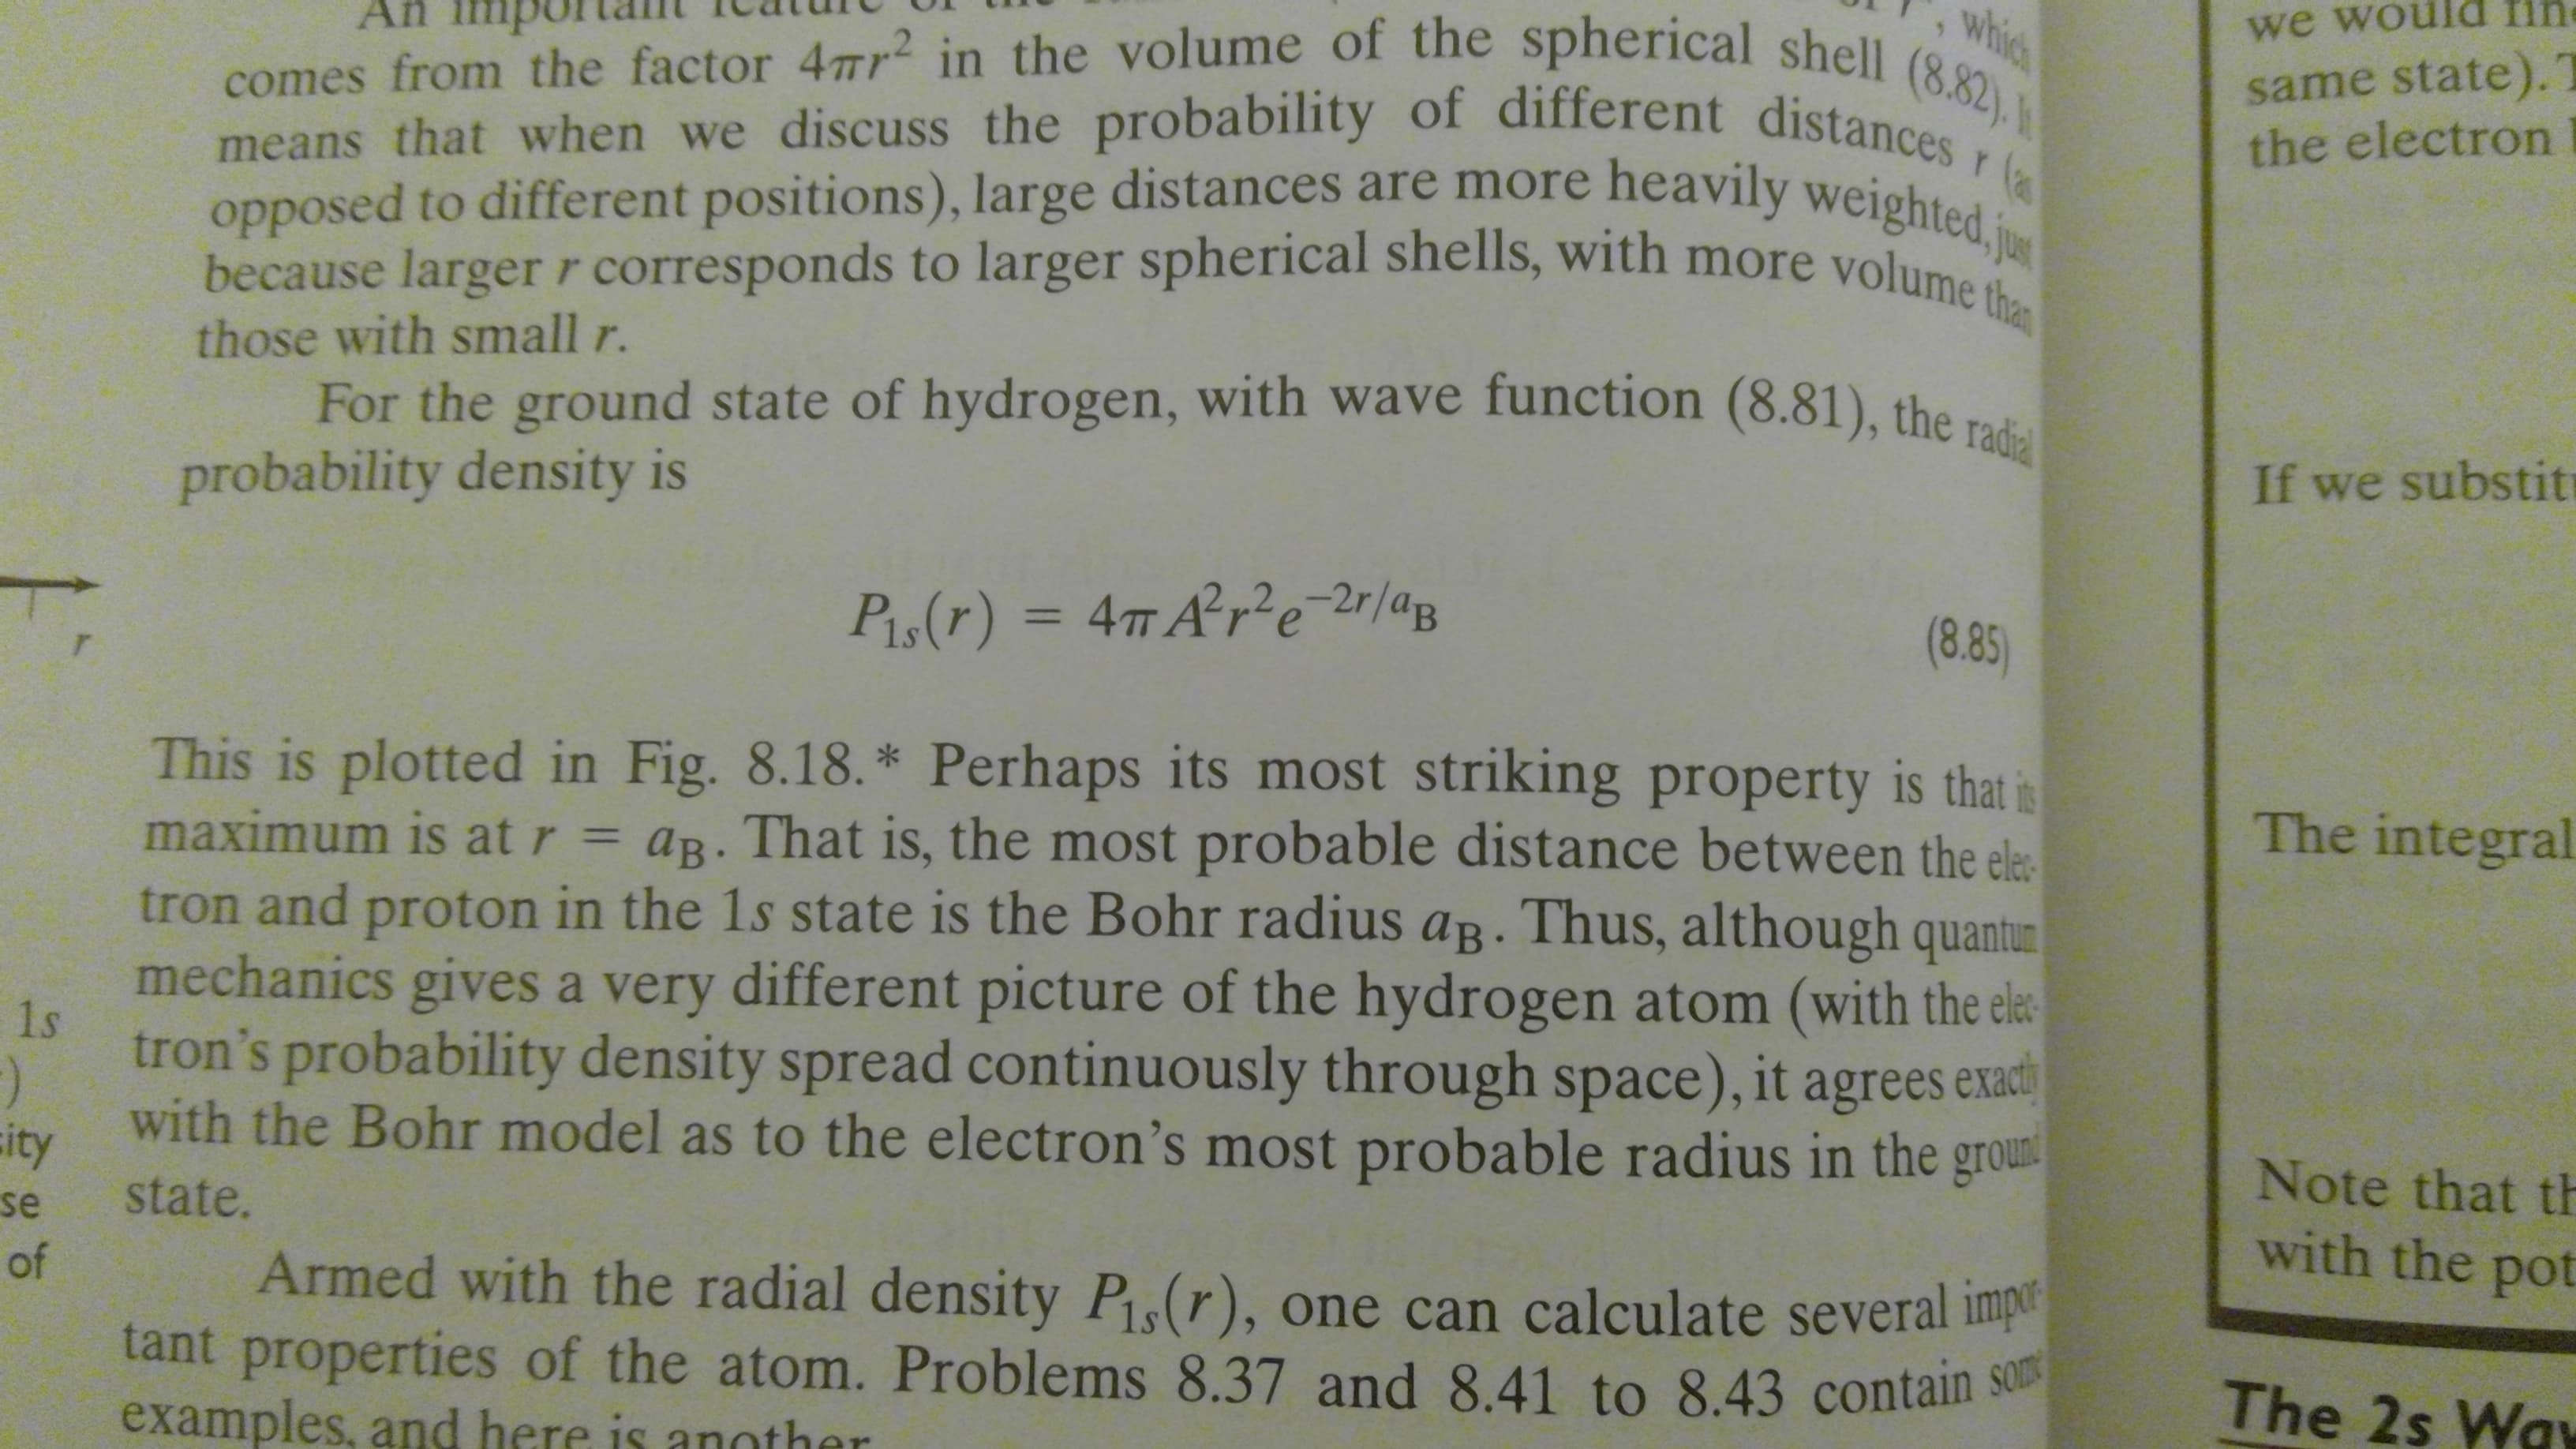 which
we would fin
comes from the factor 4mr in the volume of the spherical shell (8.82).
means that when we discuss the probability of different distances
opposed to different positions), large distances are more heavily weighted, jus
because larger r corresponds to larger spherical shells, with more volume than
same state).
the electron
Afn
r
those with small r.
For the ground state of hydrogen, with wave function (8.81), the radial
If we substit
probability density is
(8.85
Pis(r) = 4T A2re r/ap
T
This is plotted in Fig. 8.18.* Perhaps its most striking property is that is
maximum is at r = ag. That is, the most probable distance between the ele
tron and proton in the 1s state is the Bohr radius aB. Thus, although quantur
The integral
mechanics gives a very different picture of the hydrogen atom (with the ele
1s
tron's probability density spread continuously through space), it agrees exact
)
with the Bohr model as to the electron's most probable radius in the groun
ity
state.
Note that th
with the pot
se
of
Armed with the radial density P(r), one can calculate several impe
tant properties of the atom. Problems 8.37 and 8.41 to 8.43 contain s
examples, and here is another
The 2s Way
